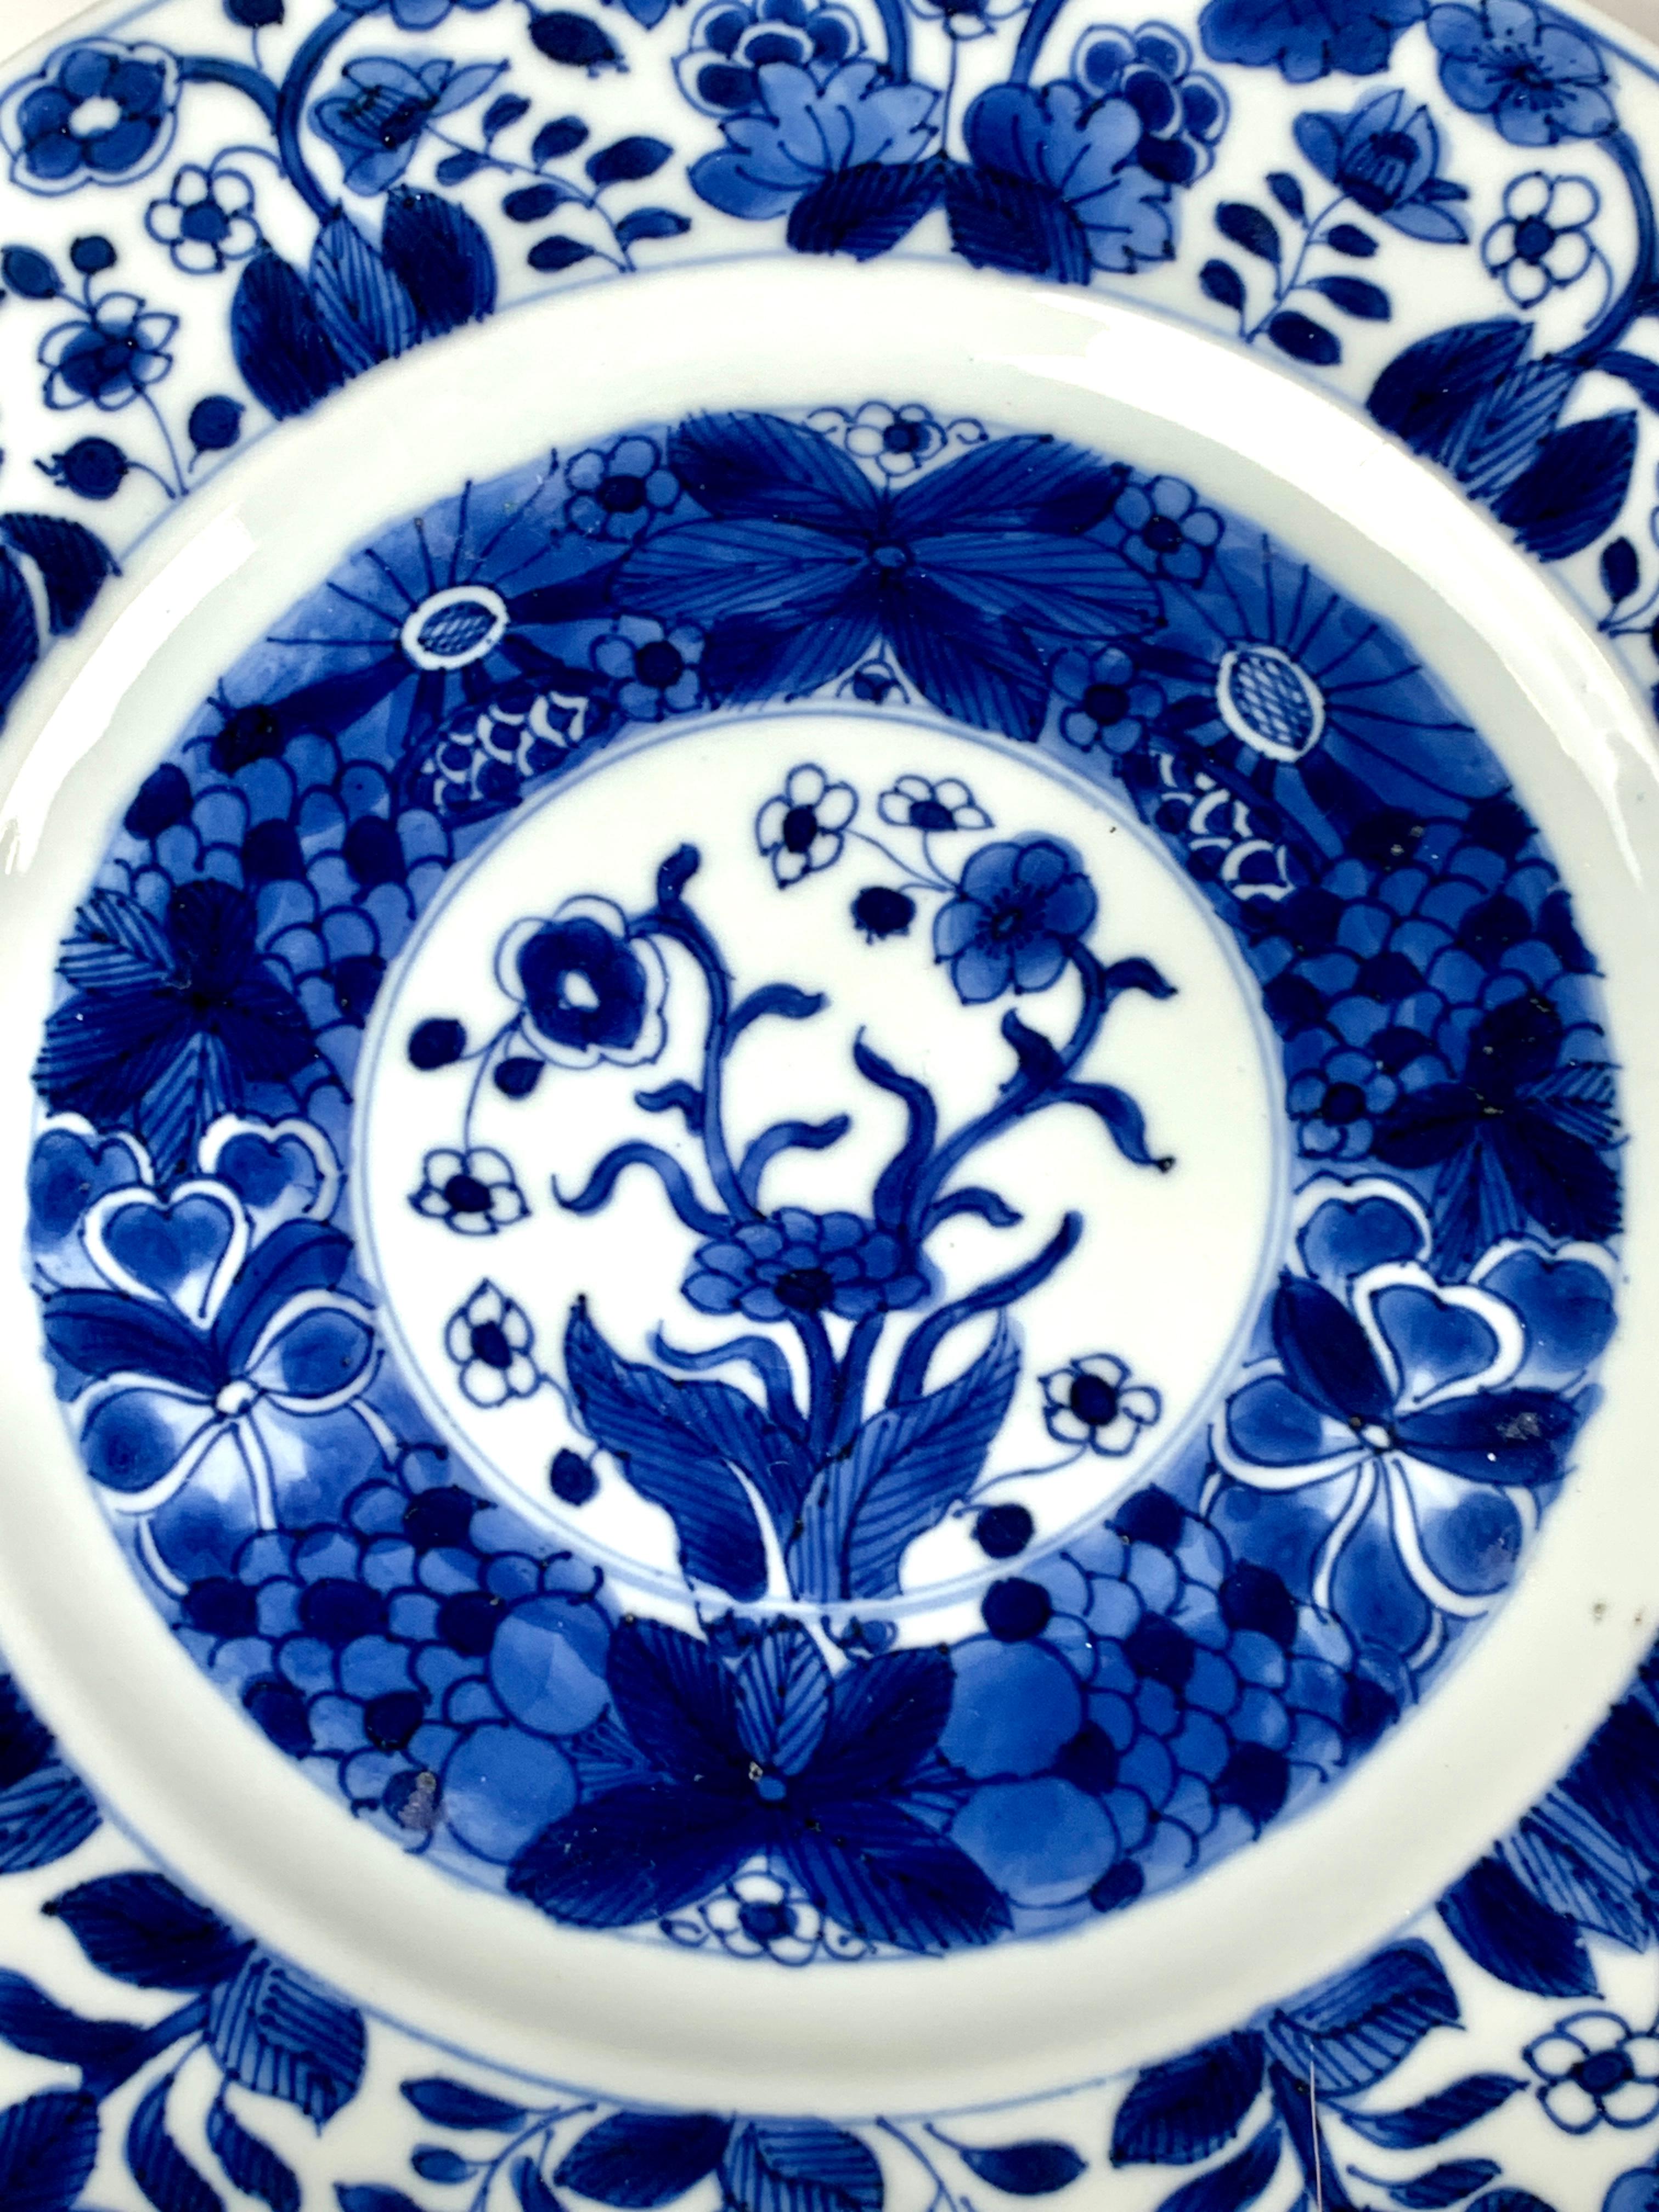 This set of six blue and white Chinese porcelain dishes was hand-painted 300 years ago, circa 1700, during the Kangxi dynasty. According to Sir Harry Garner, author of 